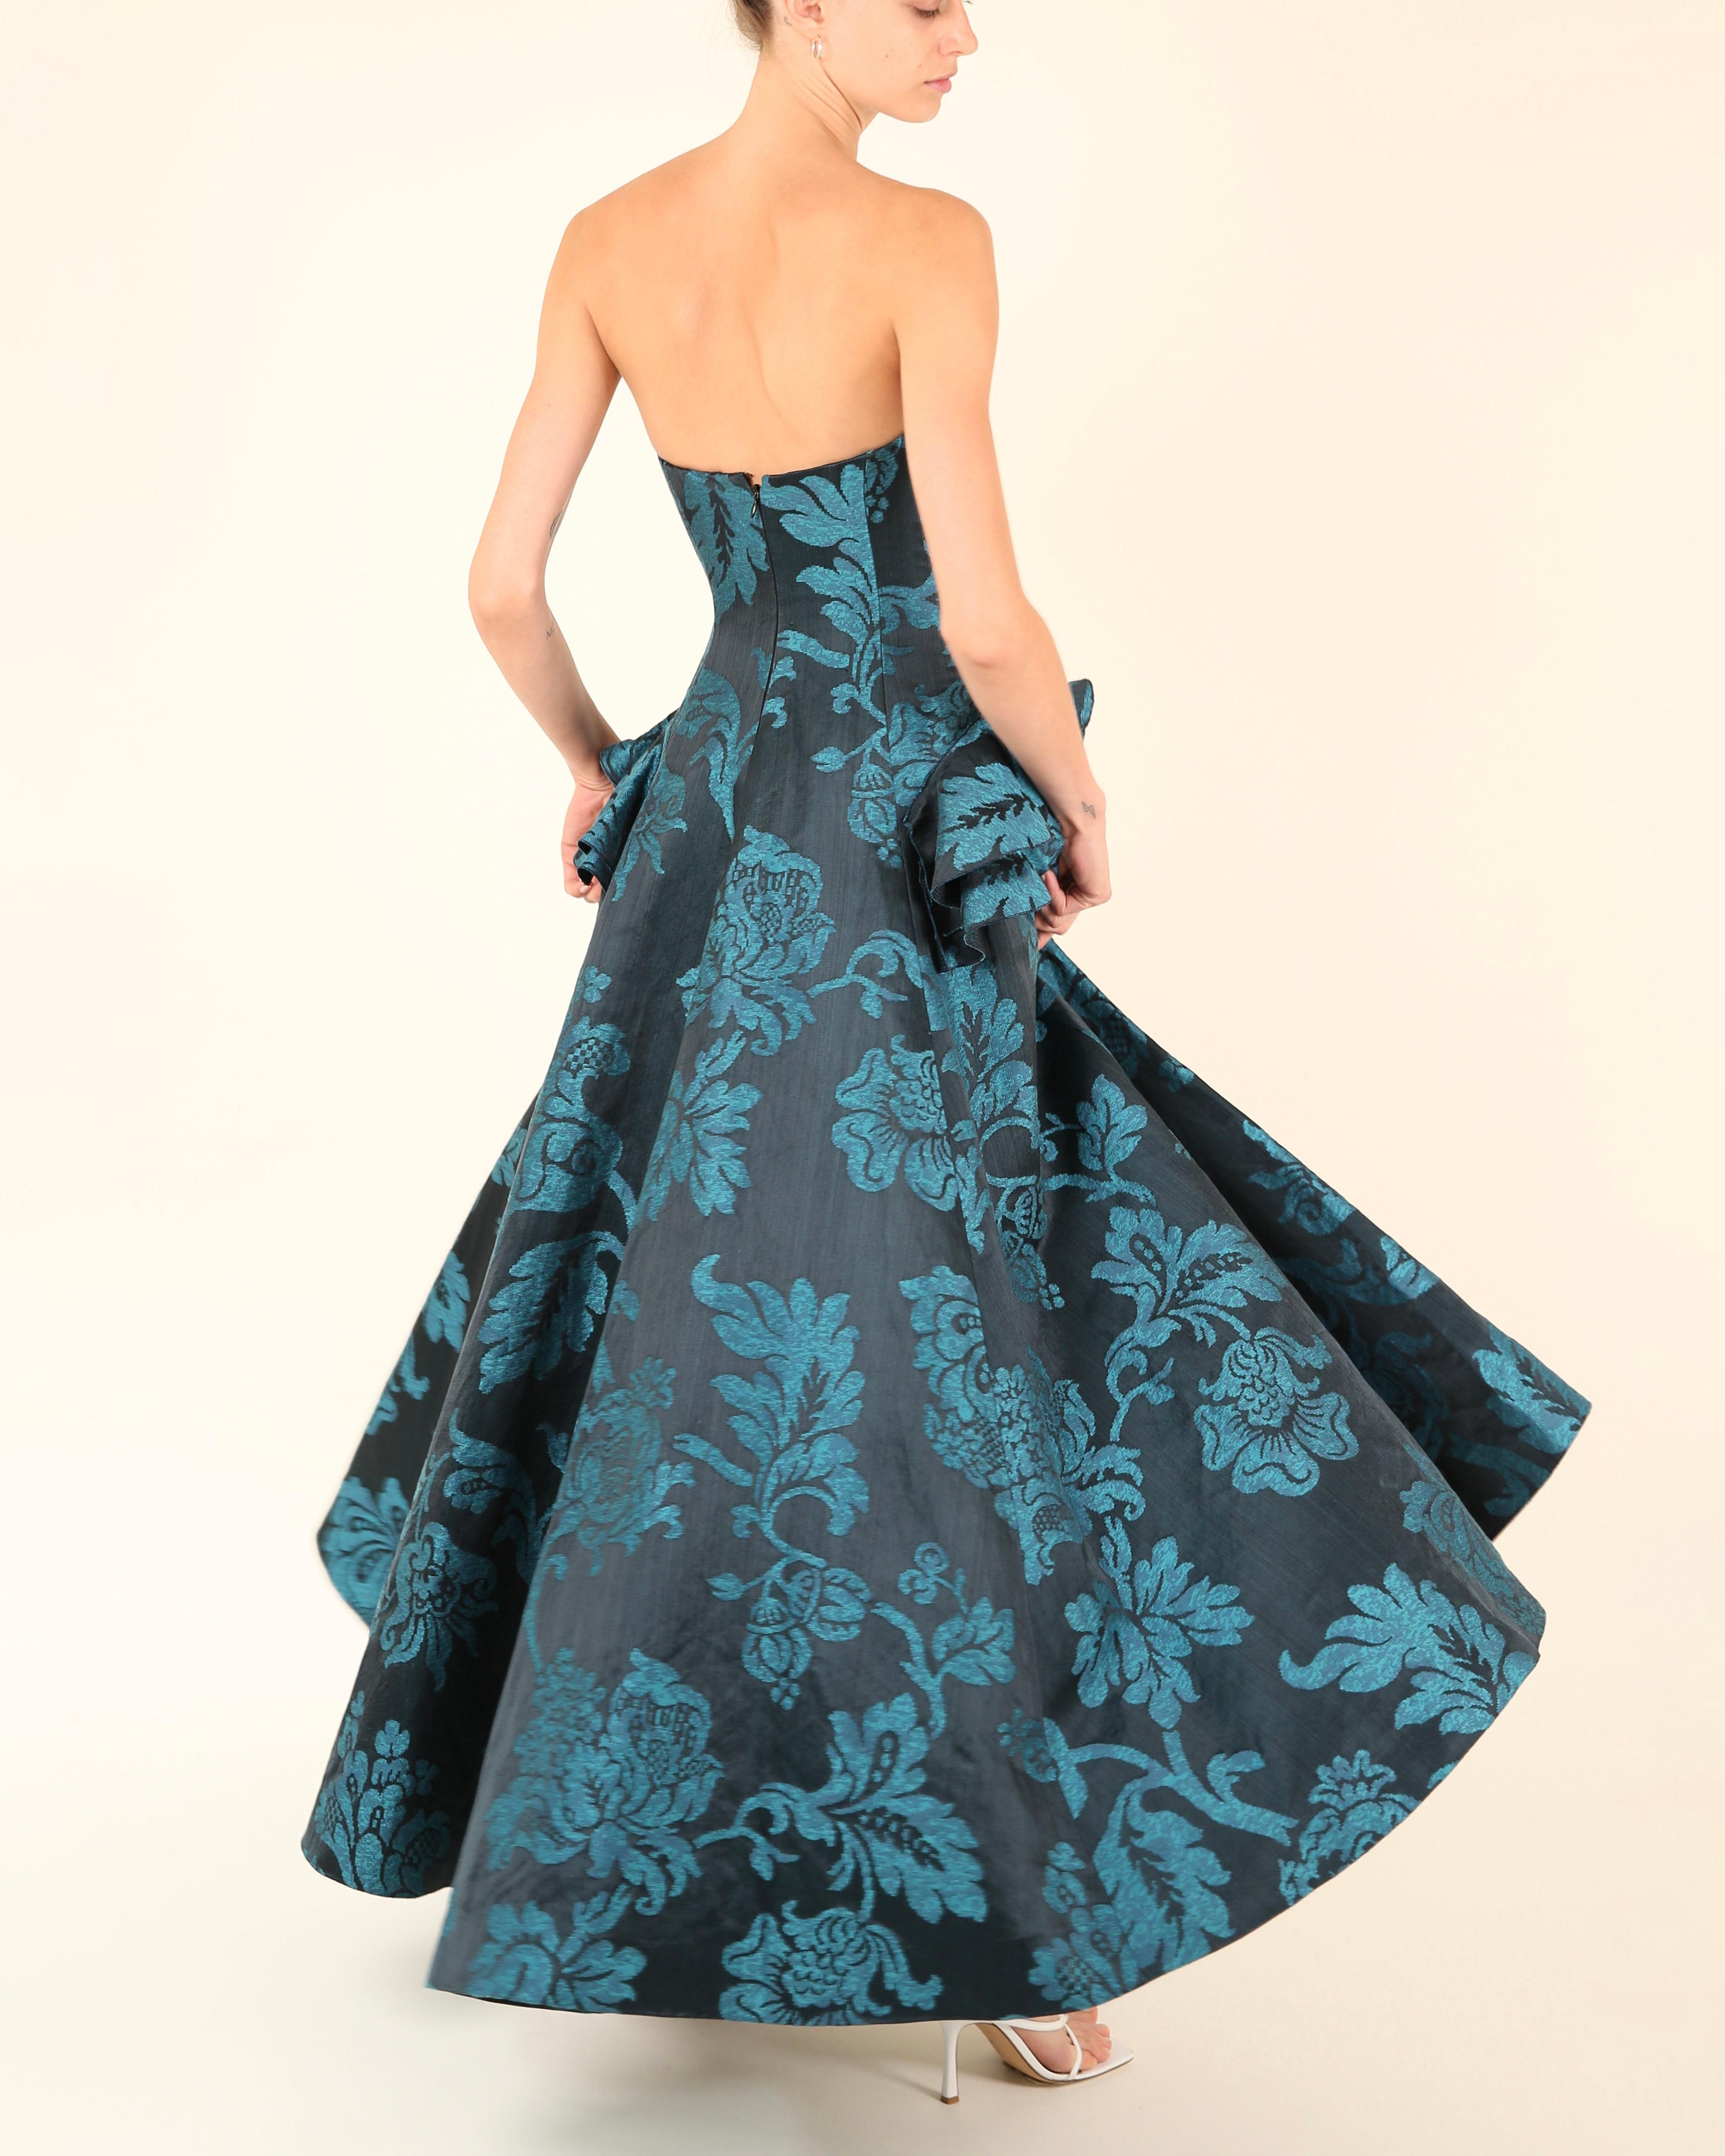 Oscar de la Renta F/W06 strapless floral blue teal fit and flare dress gown XS For Sale 11